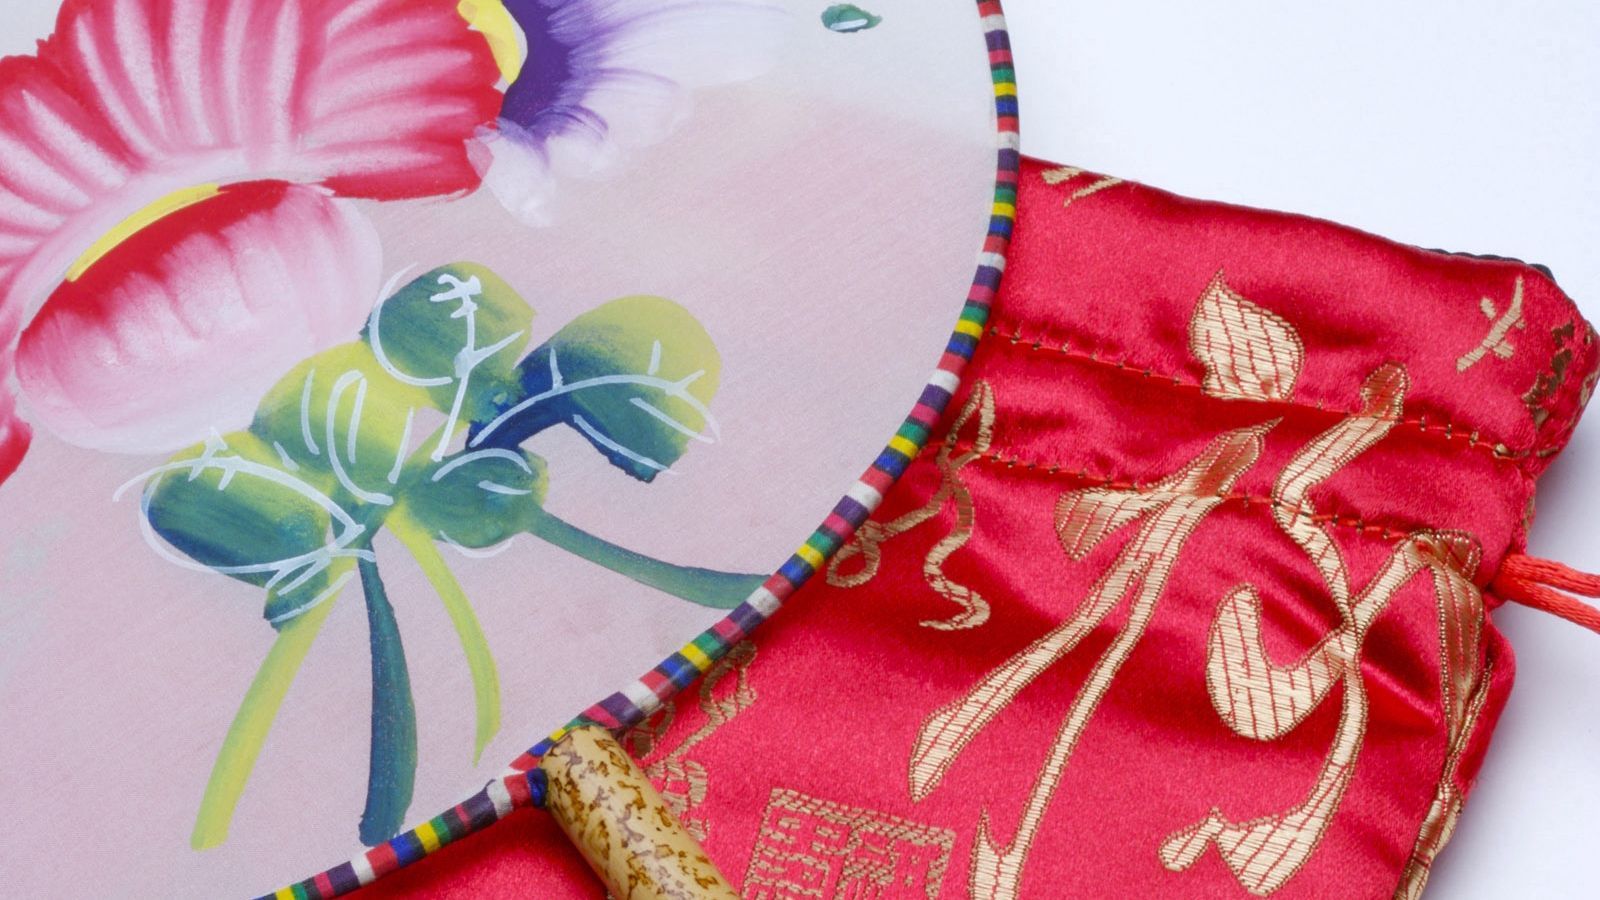 Download wallpaper 1600x900 fan, fabric, china, embroidery